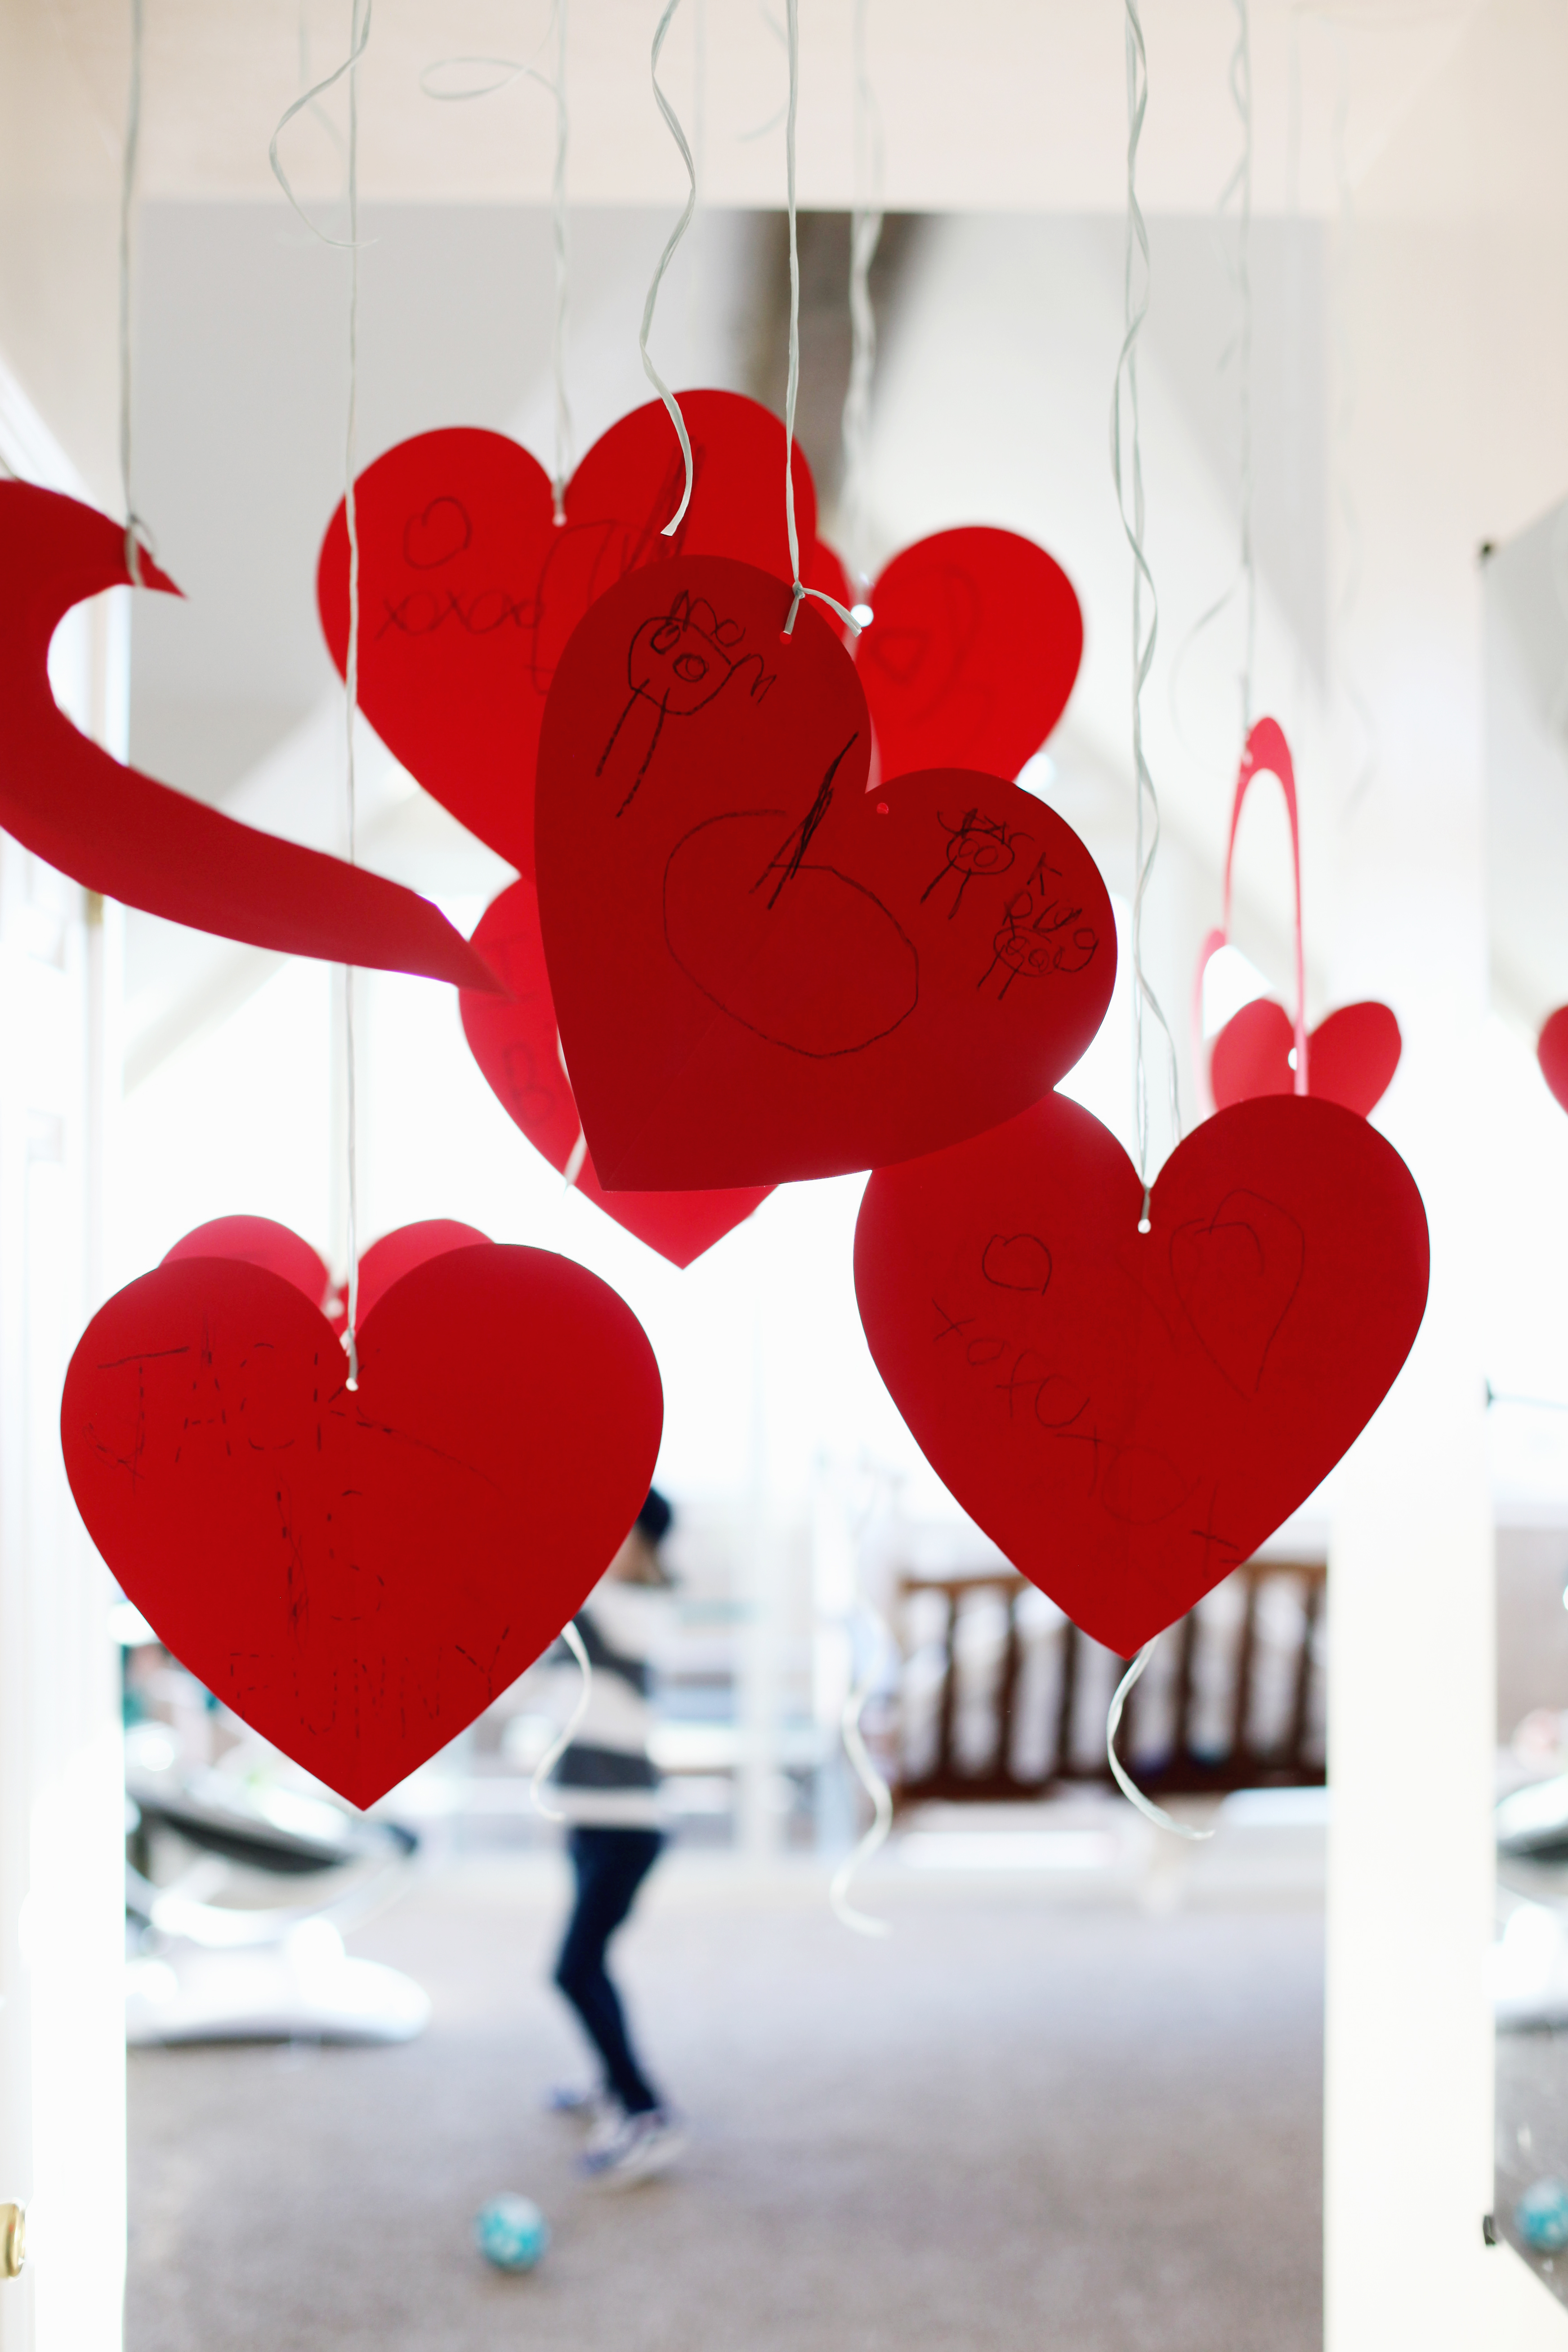 Family Valentines Day Activities To Cherish by Ginger Parrish from The Parrish Place